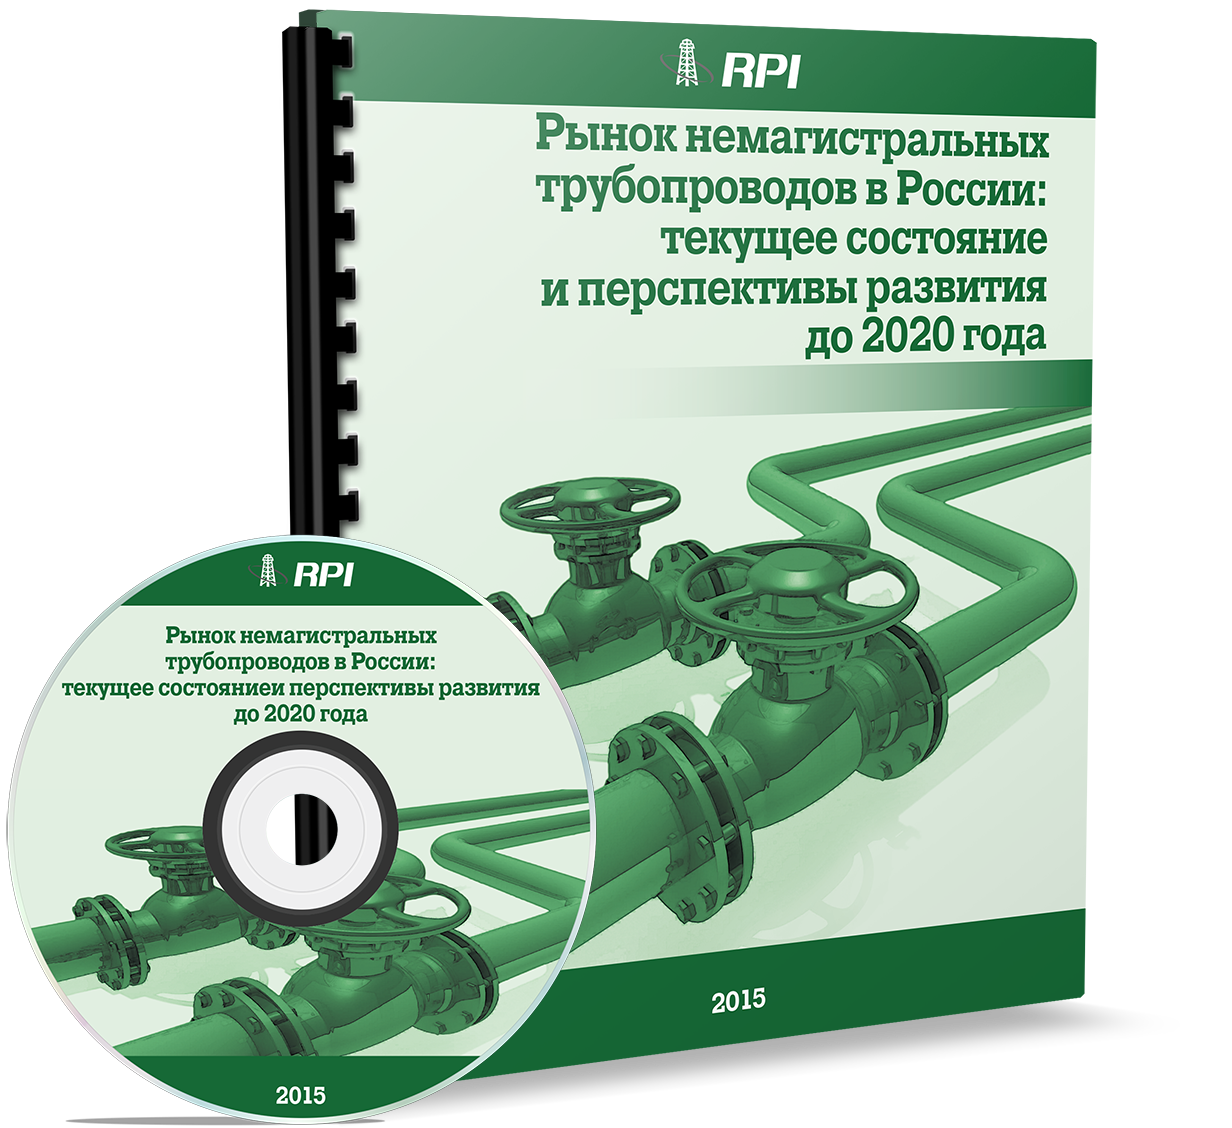 Non-Trunk Pipelines Market in Russia: Current State and Development Prospects until 2020